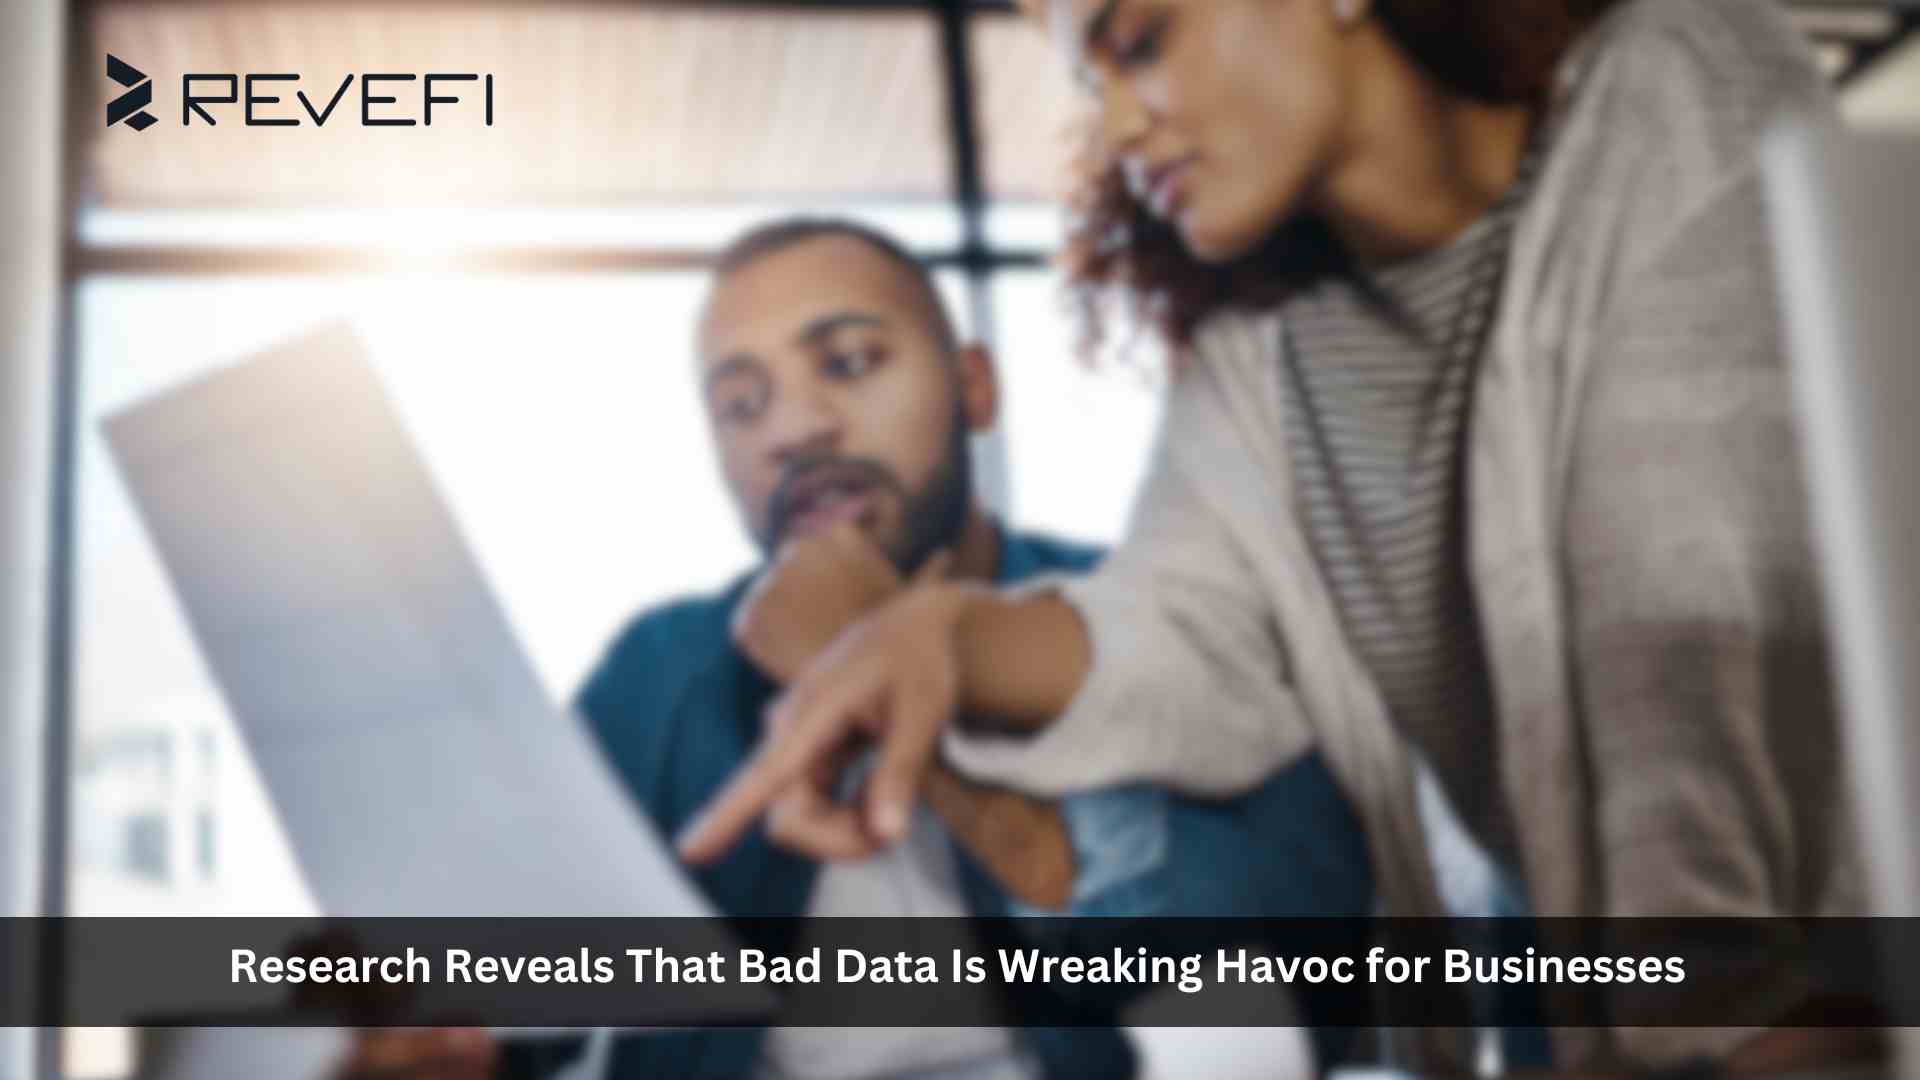 New Revefi Research Reveals That Bad Data Is Wreaking Havoc for Businesses